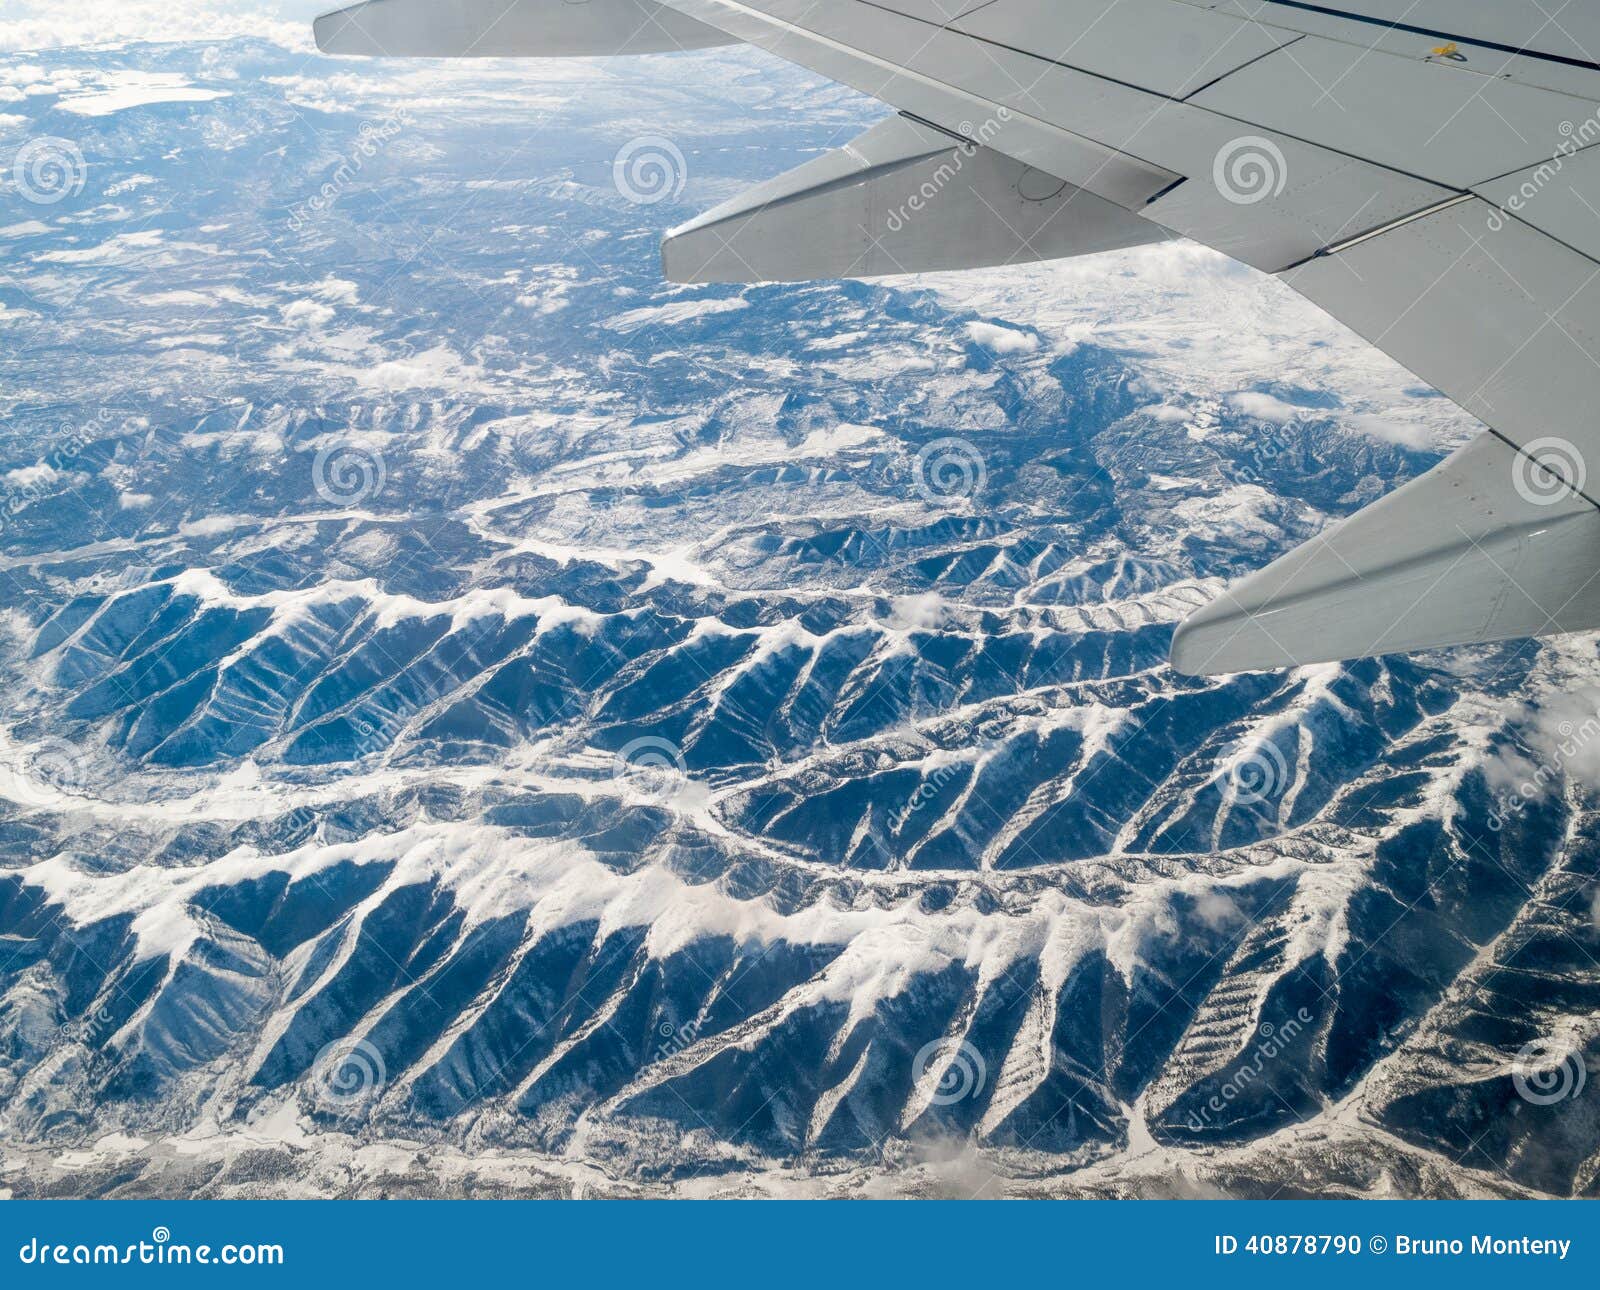 Aerial View Of Mountain Range Viewed From Stock Photo - Image of flying